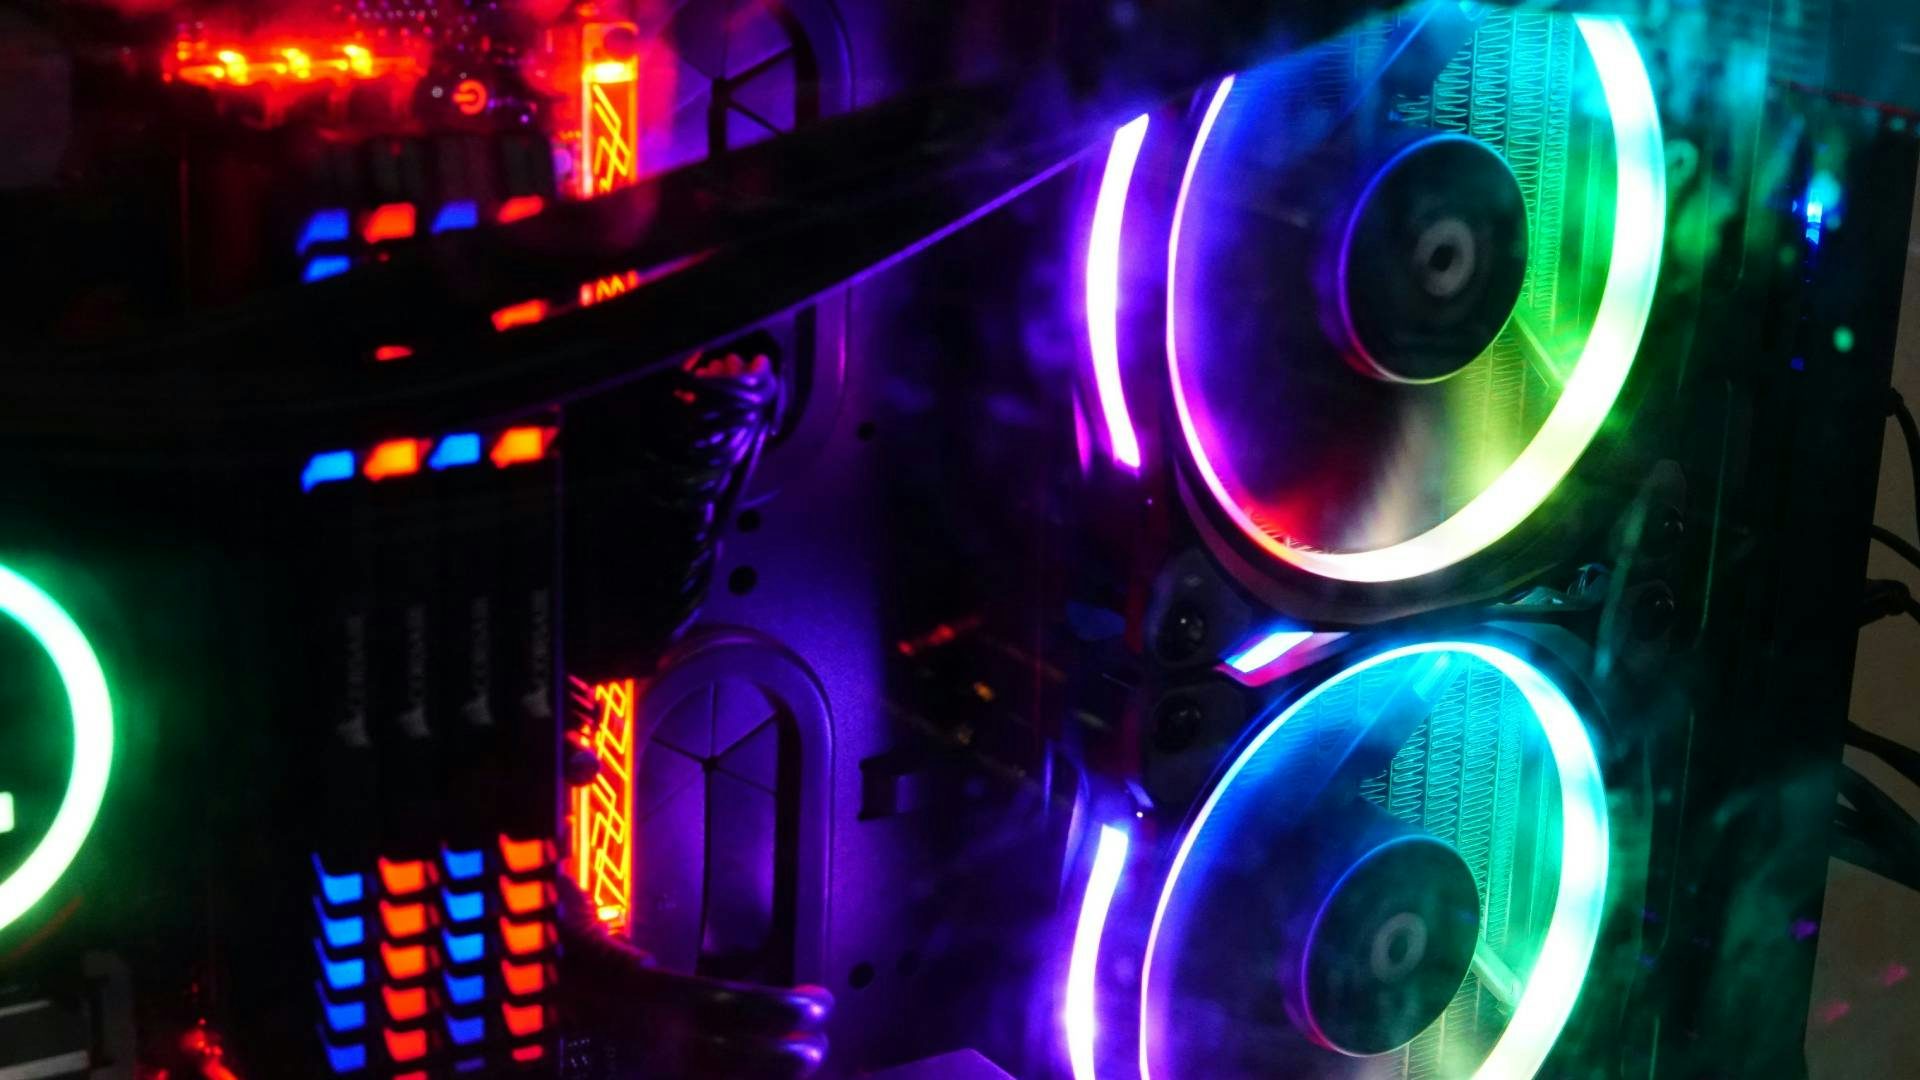 Take a photo with as much RGB lighting as possible for up to $15!